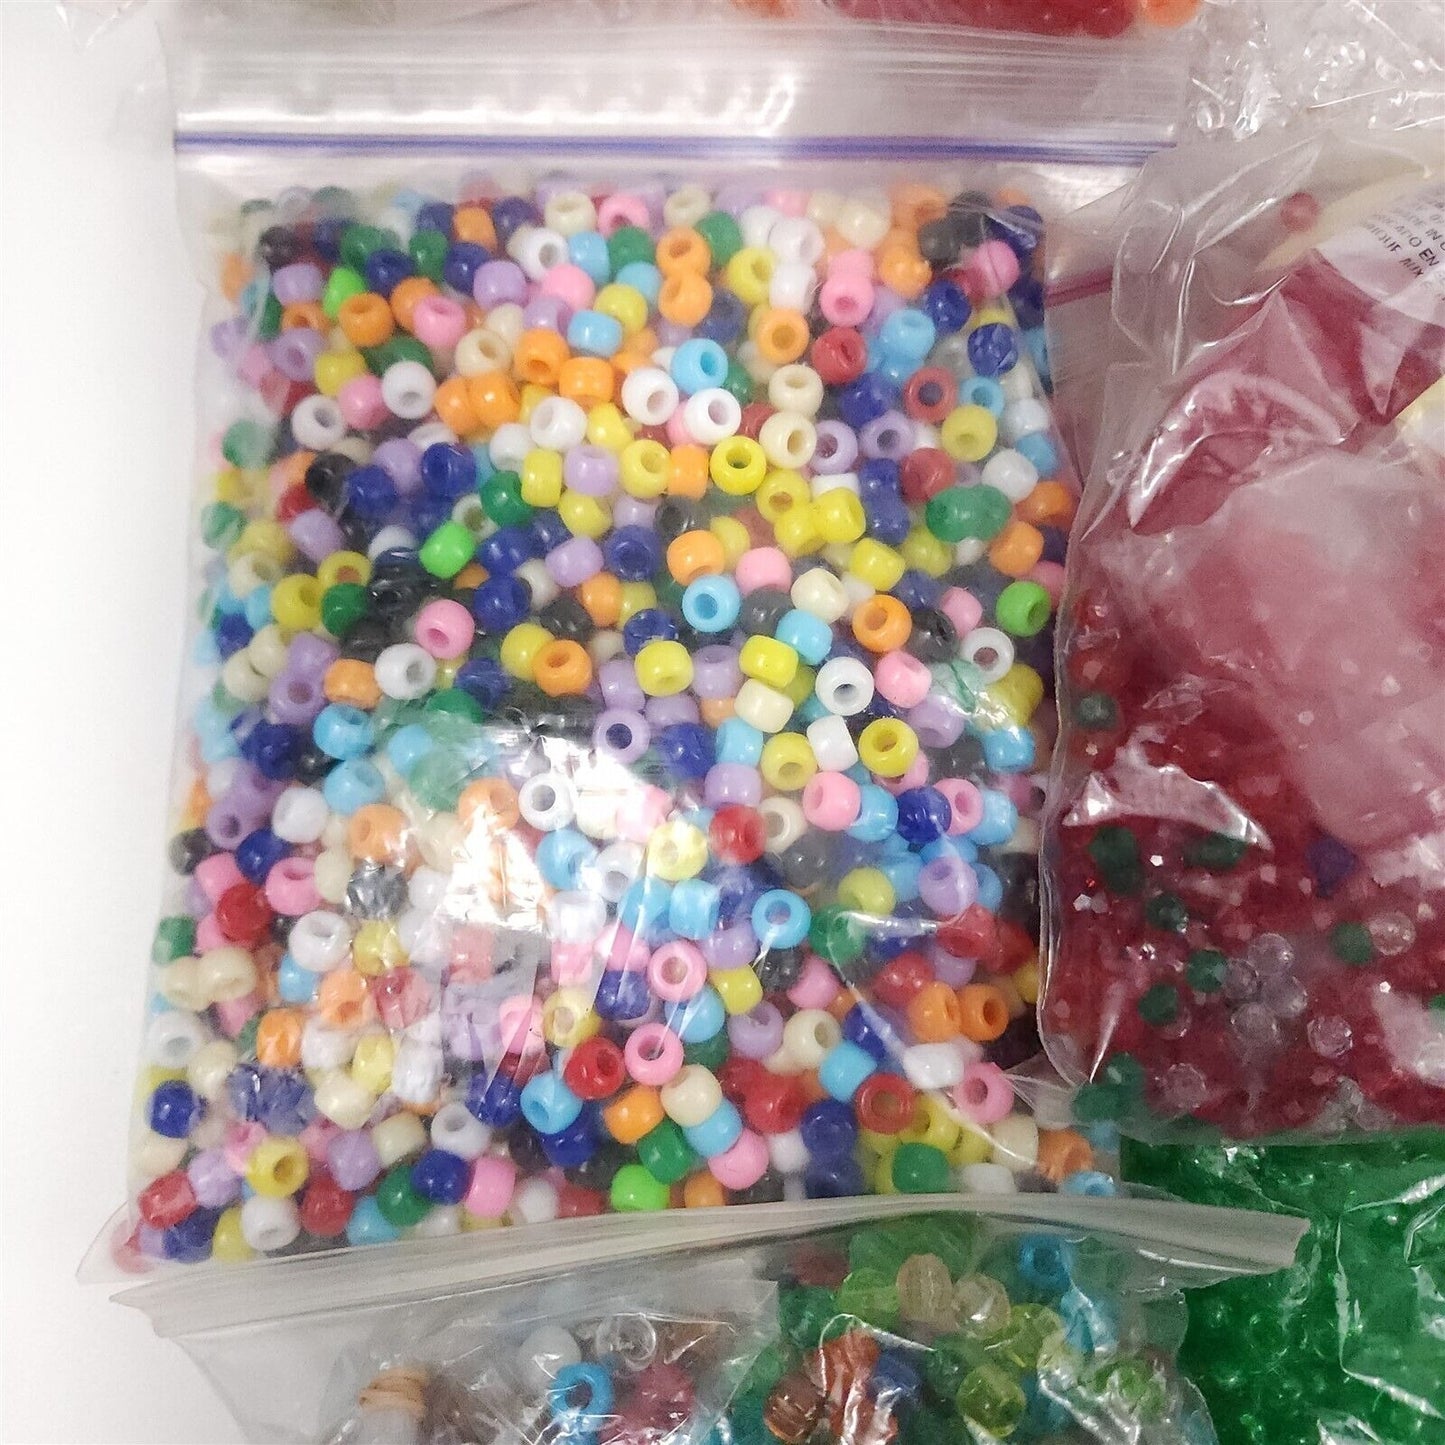 7 Lbs of Beads Arts & Crafts Lot Jewlery Seed Beads Plastic Glass Stone Misc.